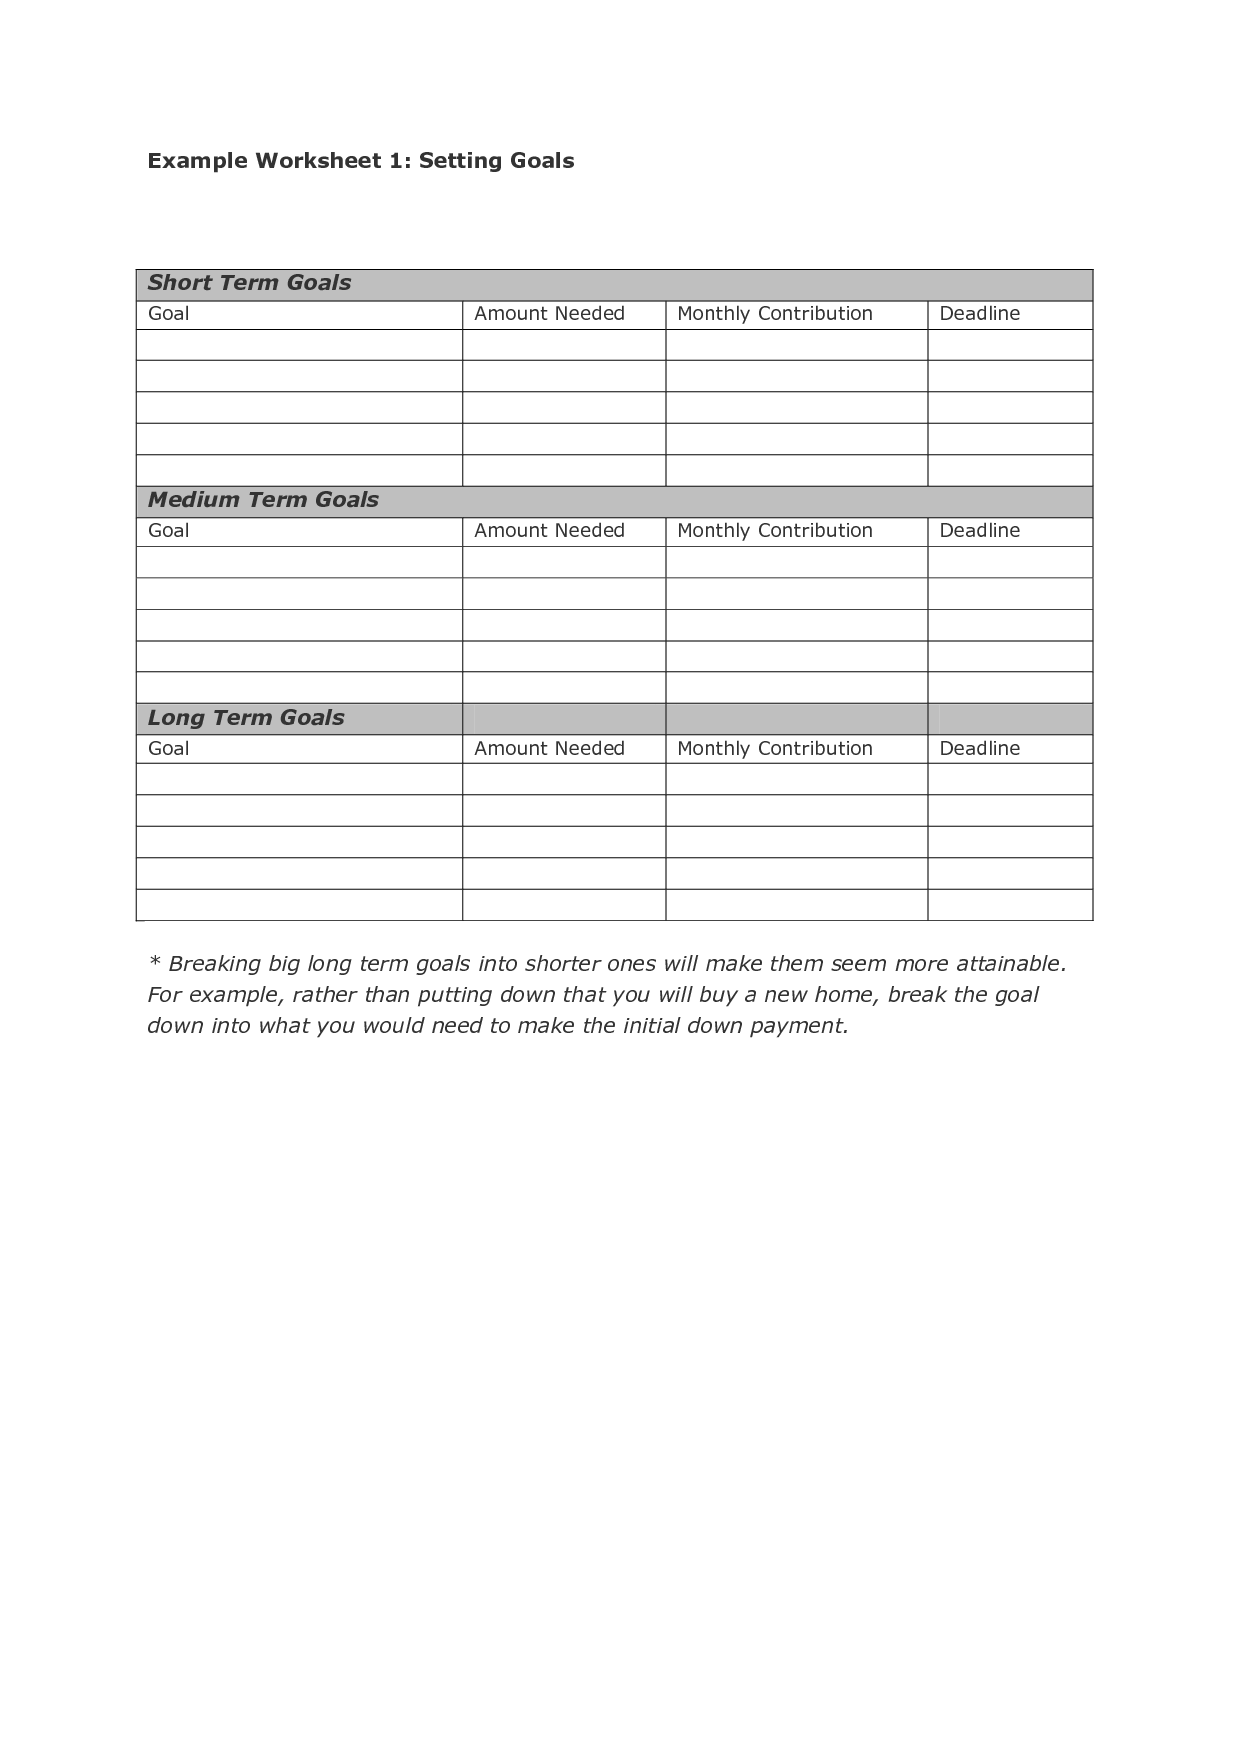 18-best-images-of-examples-of-goal-setting-worksheets-personal-goal-setting-worksheet